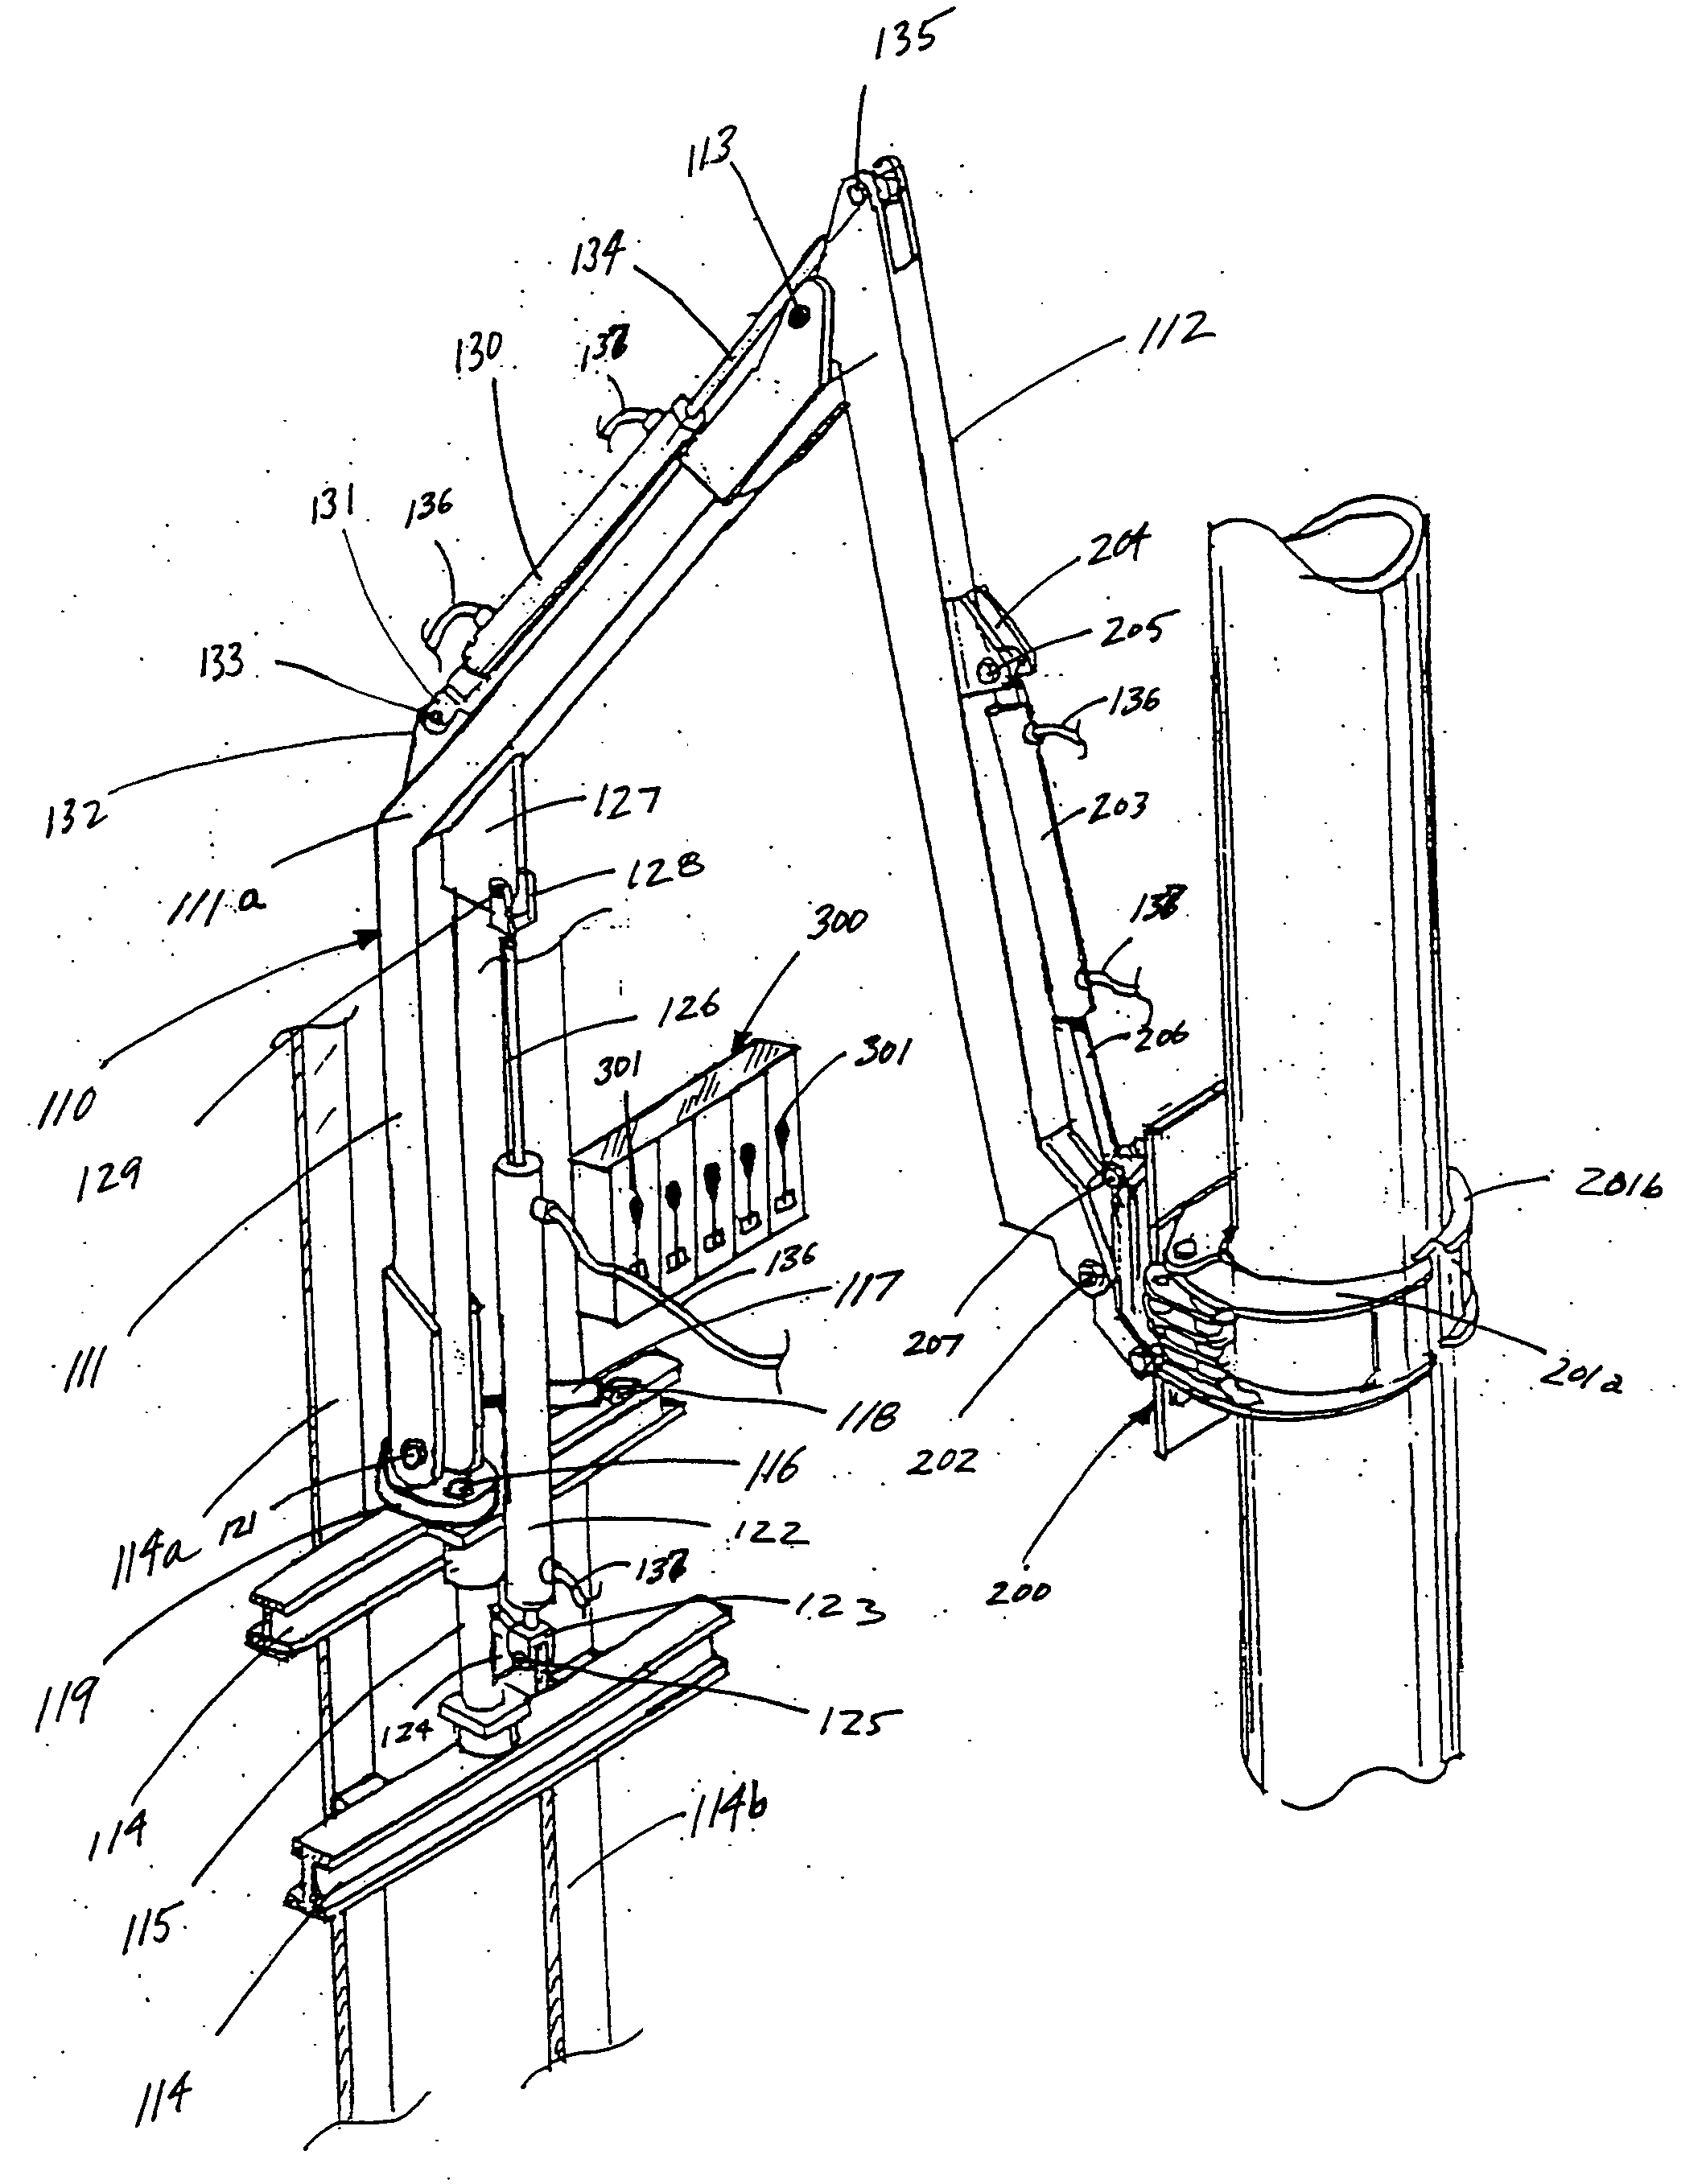 Apparatus for positioning and stabbing pipe in a drilling rig derrick